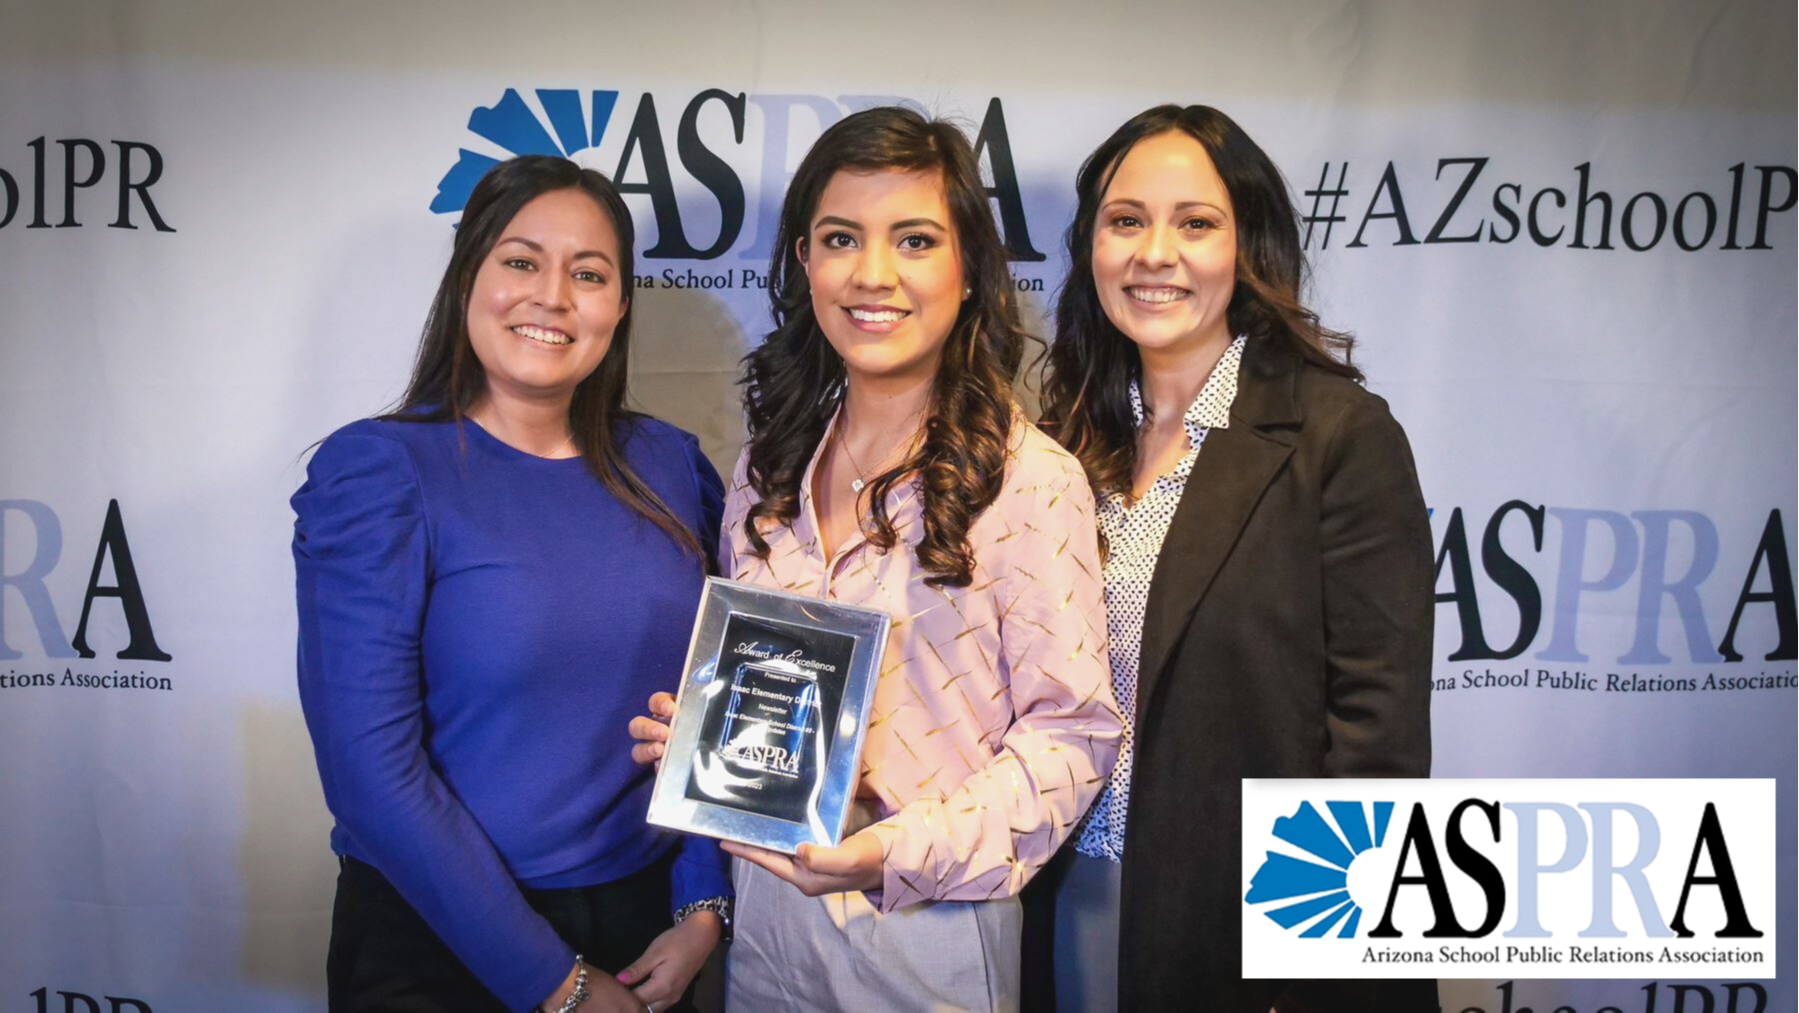 Communications team receives an award from the Arizona School Public Relations Association